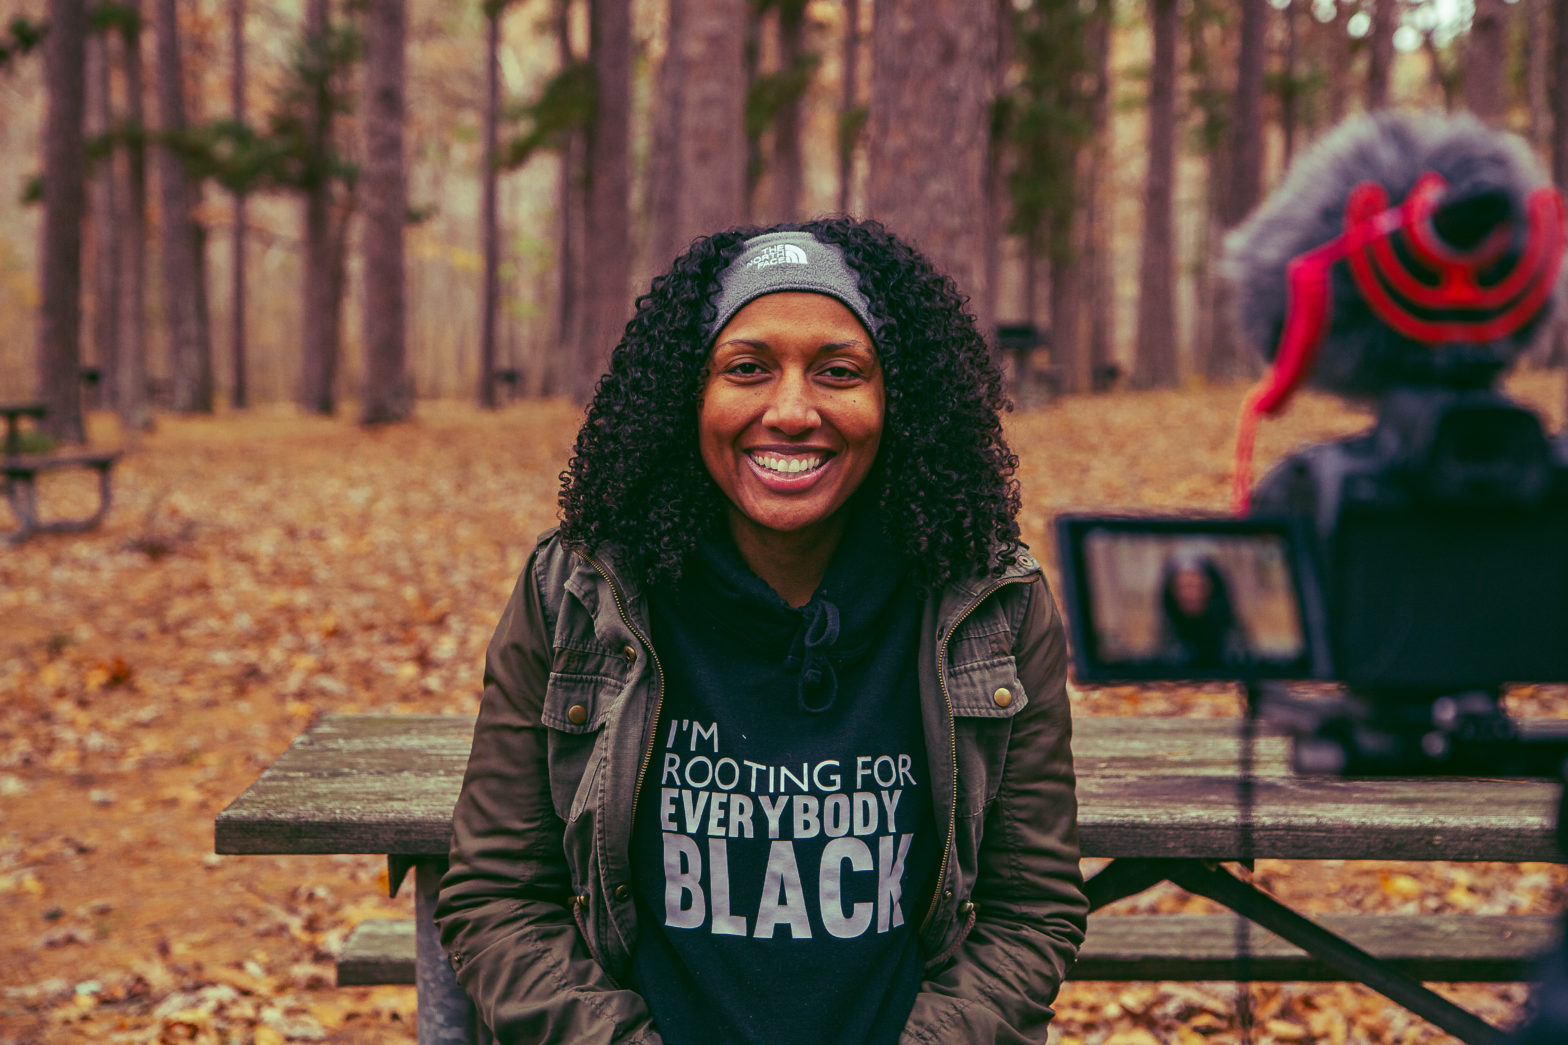 Meet Debbie Njai: The Founder Of Black People Who Hike, Making The Great Outdoors Truly Great